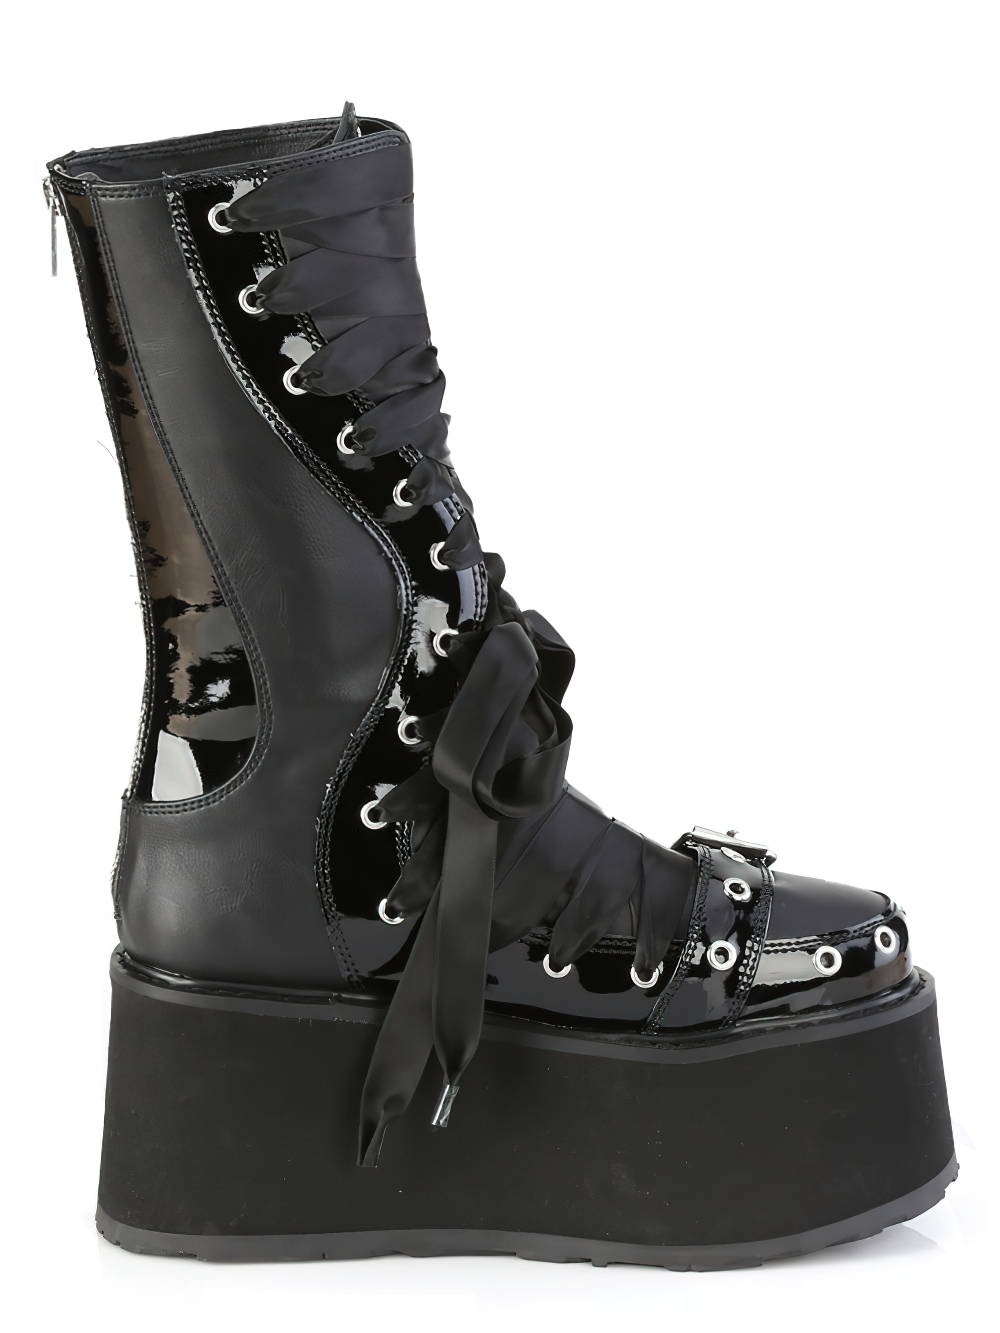 DEMONIA Lace-Up Mid-Calf Boots with Chains and Zipper